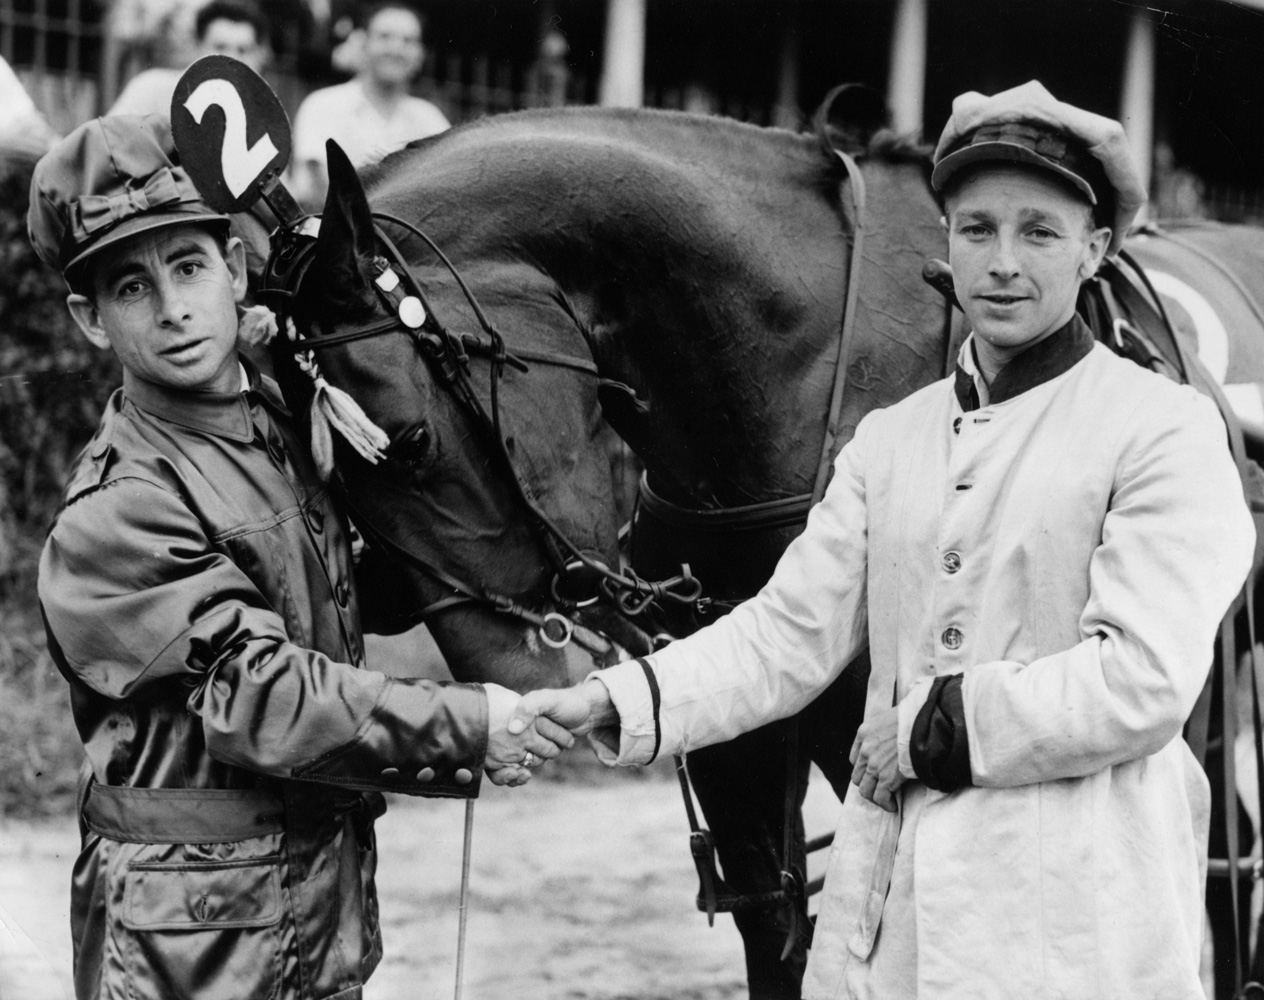 Johnny Longden and Wayne Wright shaking hands at an exhibition trotting race at Empire City in August 1943 (Acme Photo/Courtesy of Ken Grayson)